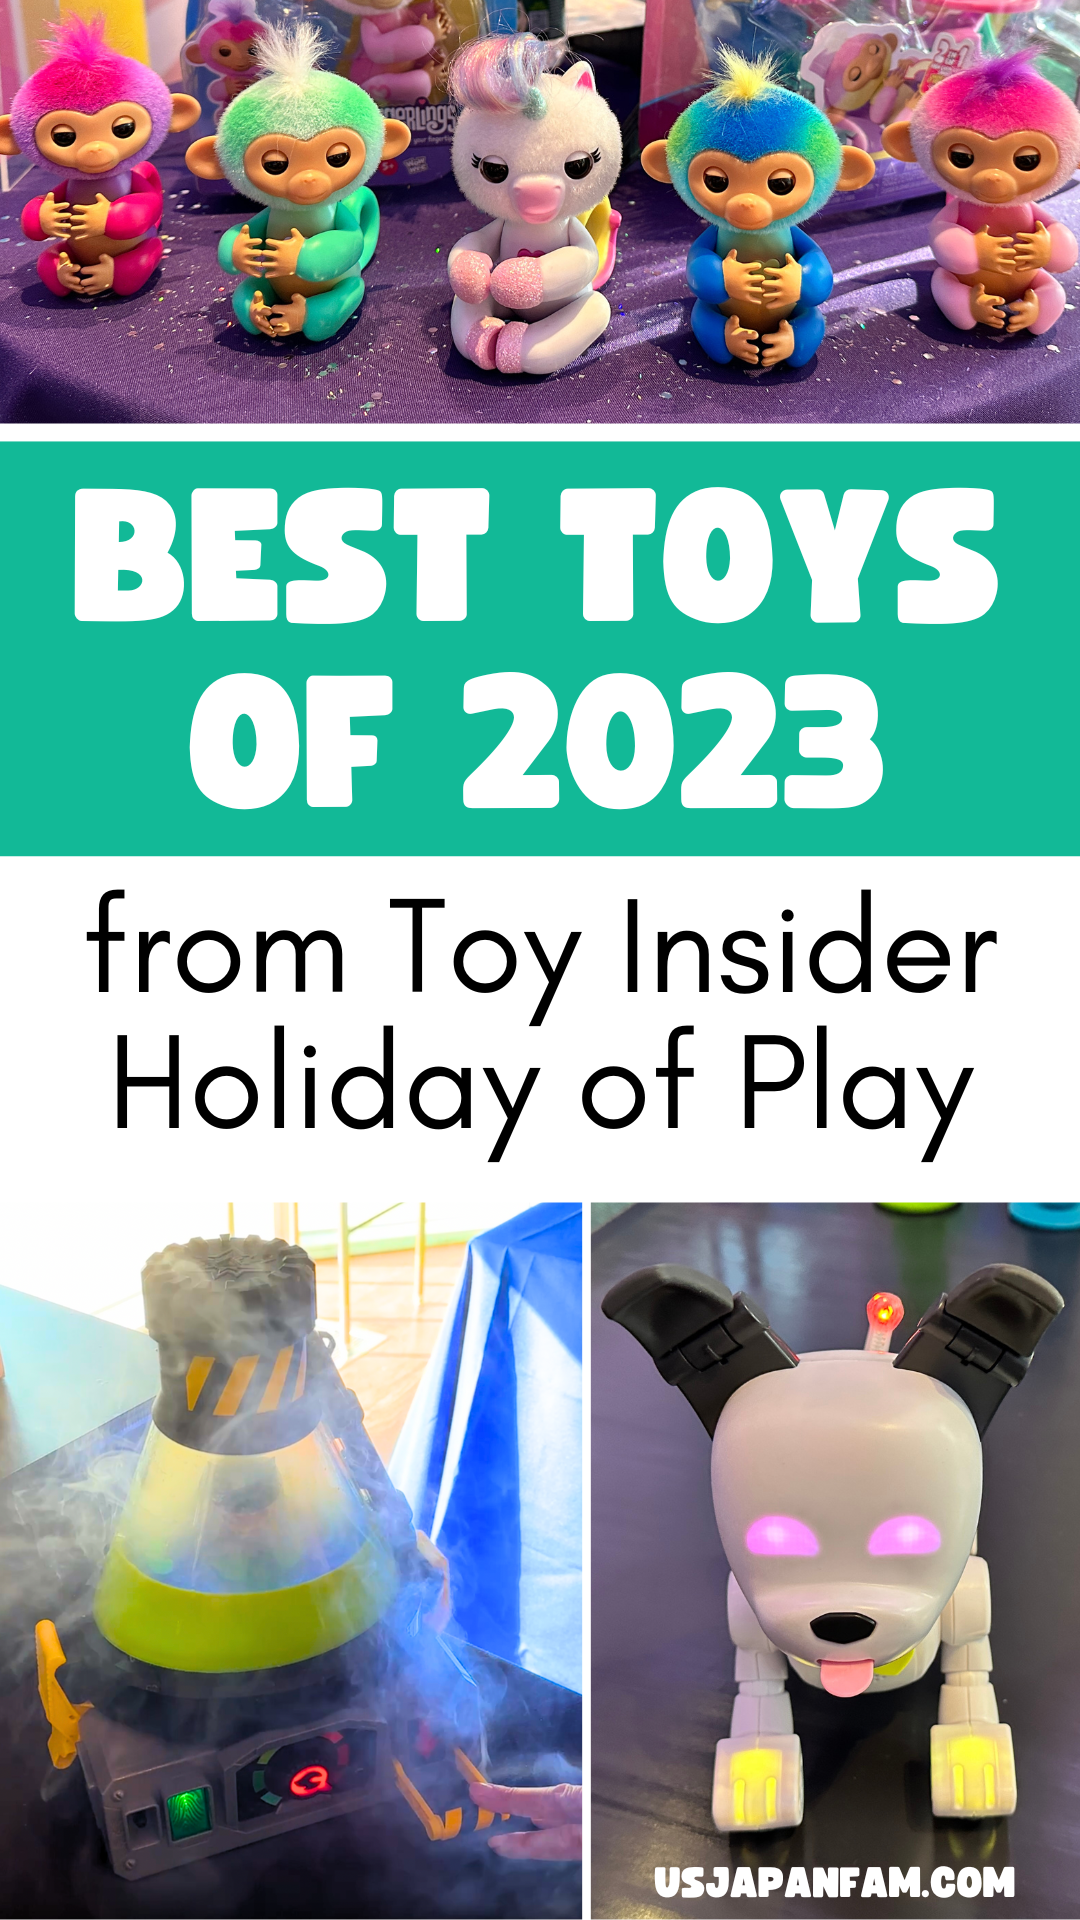 Best toys of 2023